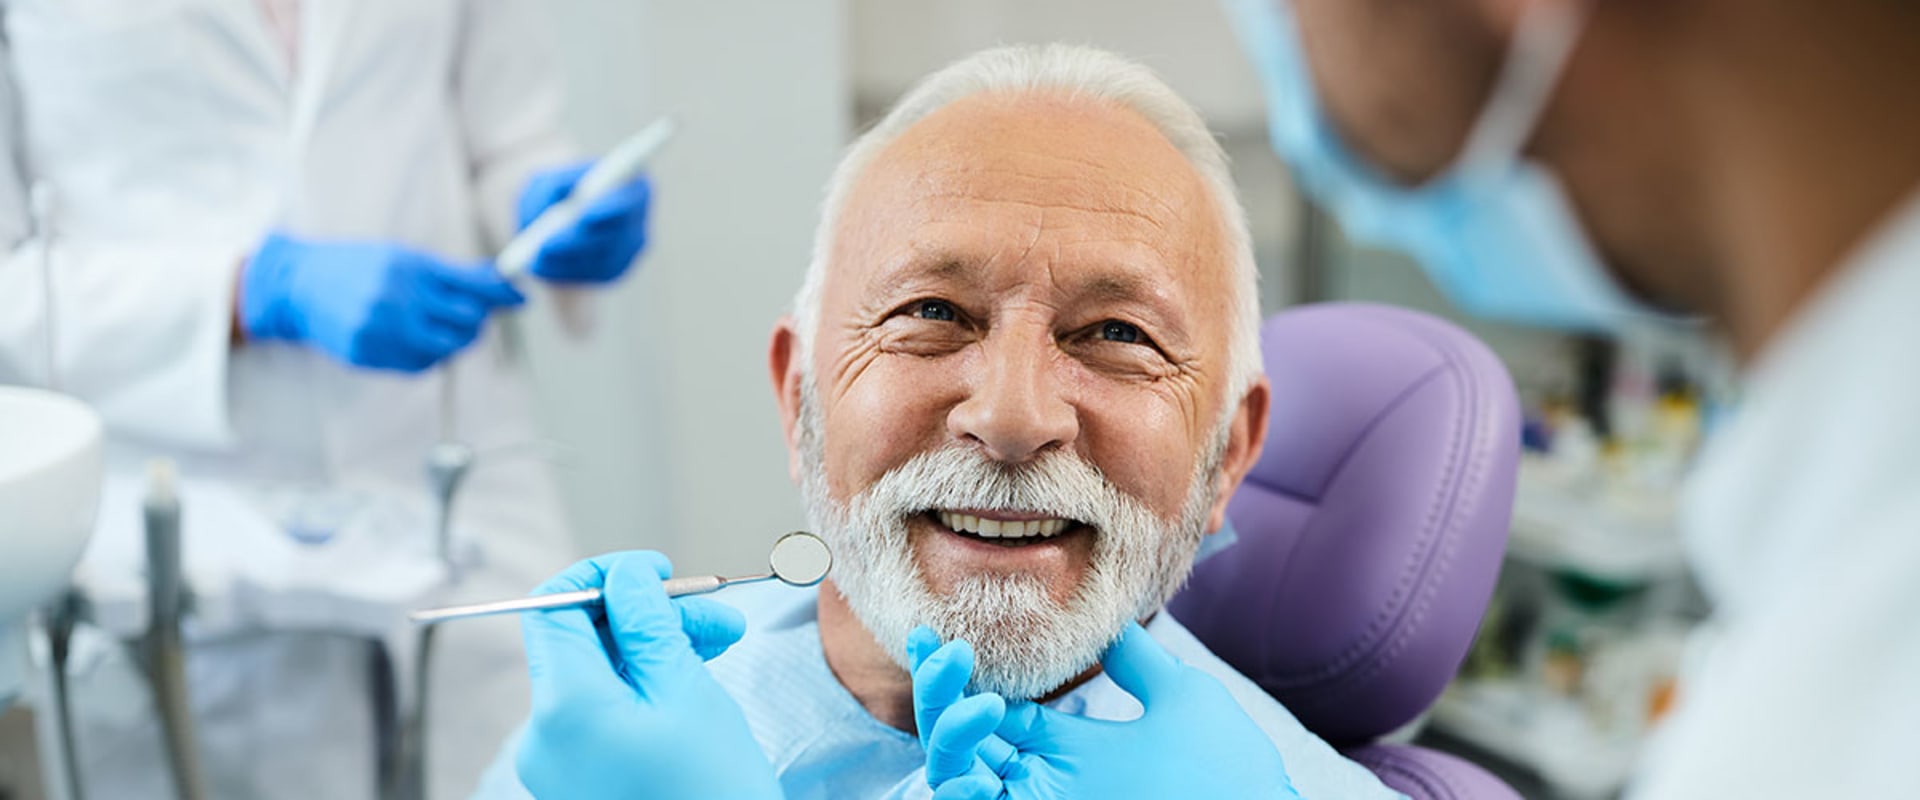 Revitalize Your Smile: All-On-Four Dentures And Cosmetic Dentistry In Cedar Park, TX